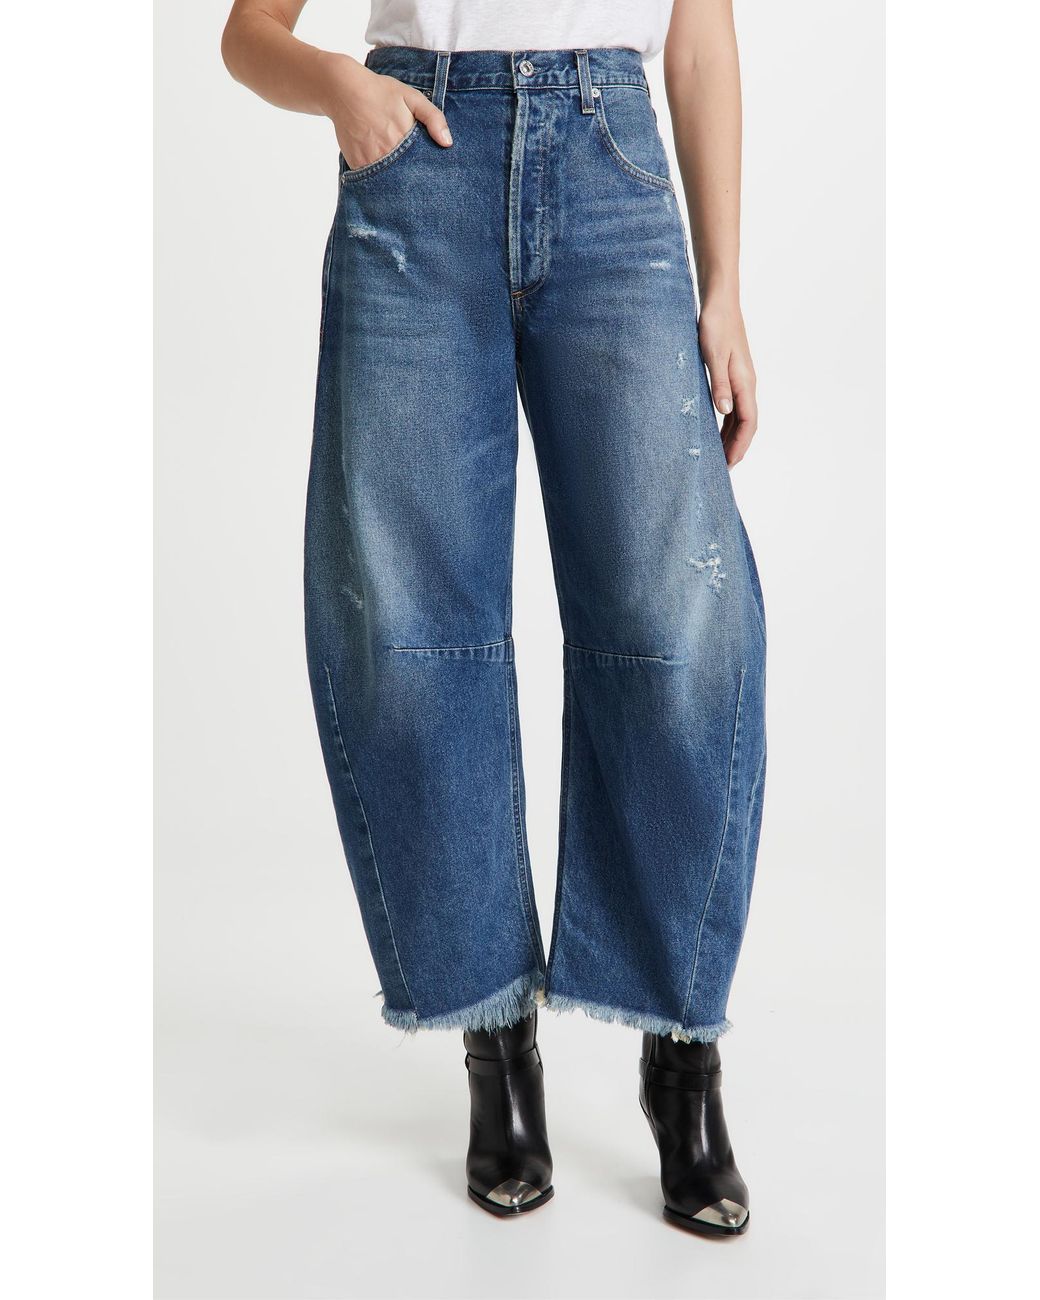 Citizens of Humanity Denim Horseshoe Jeans in Blue | Lyst UK